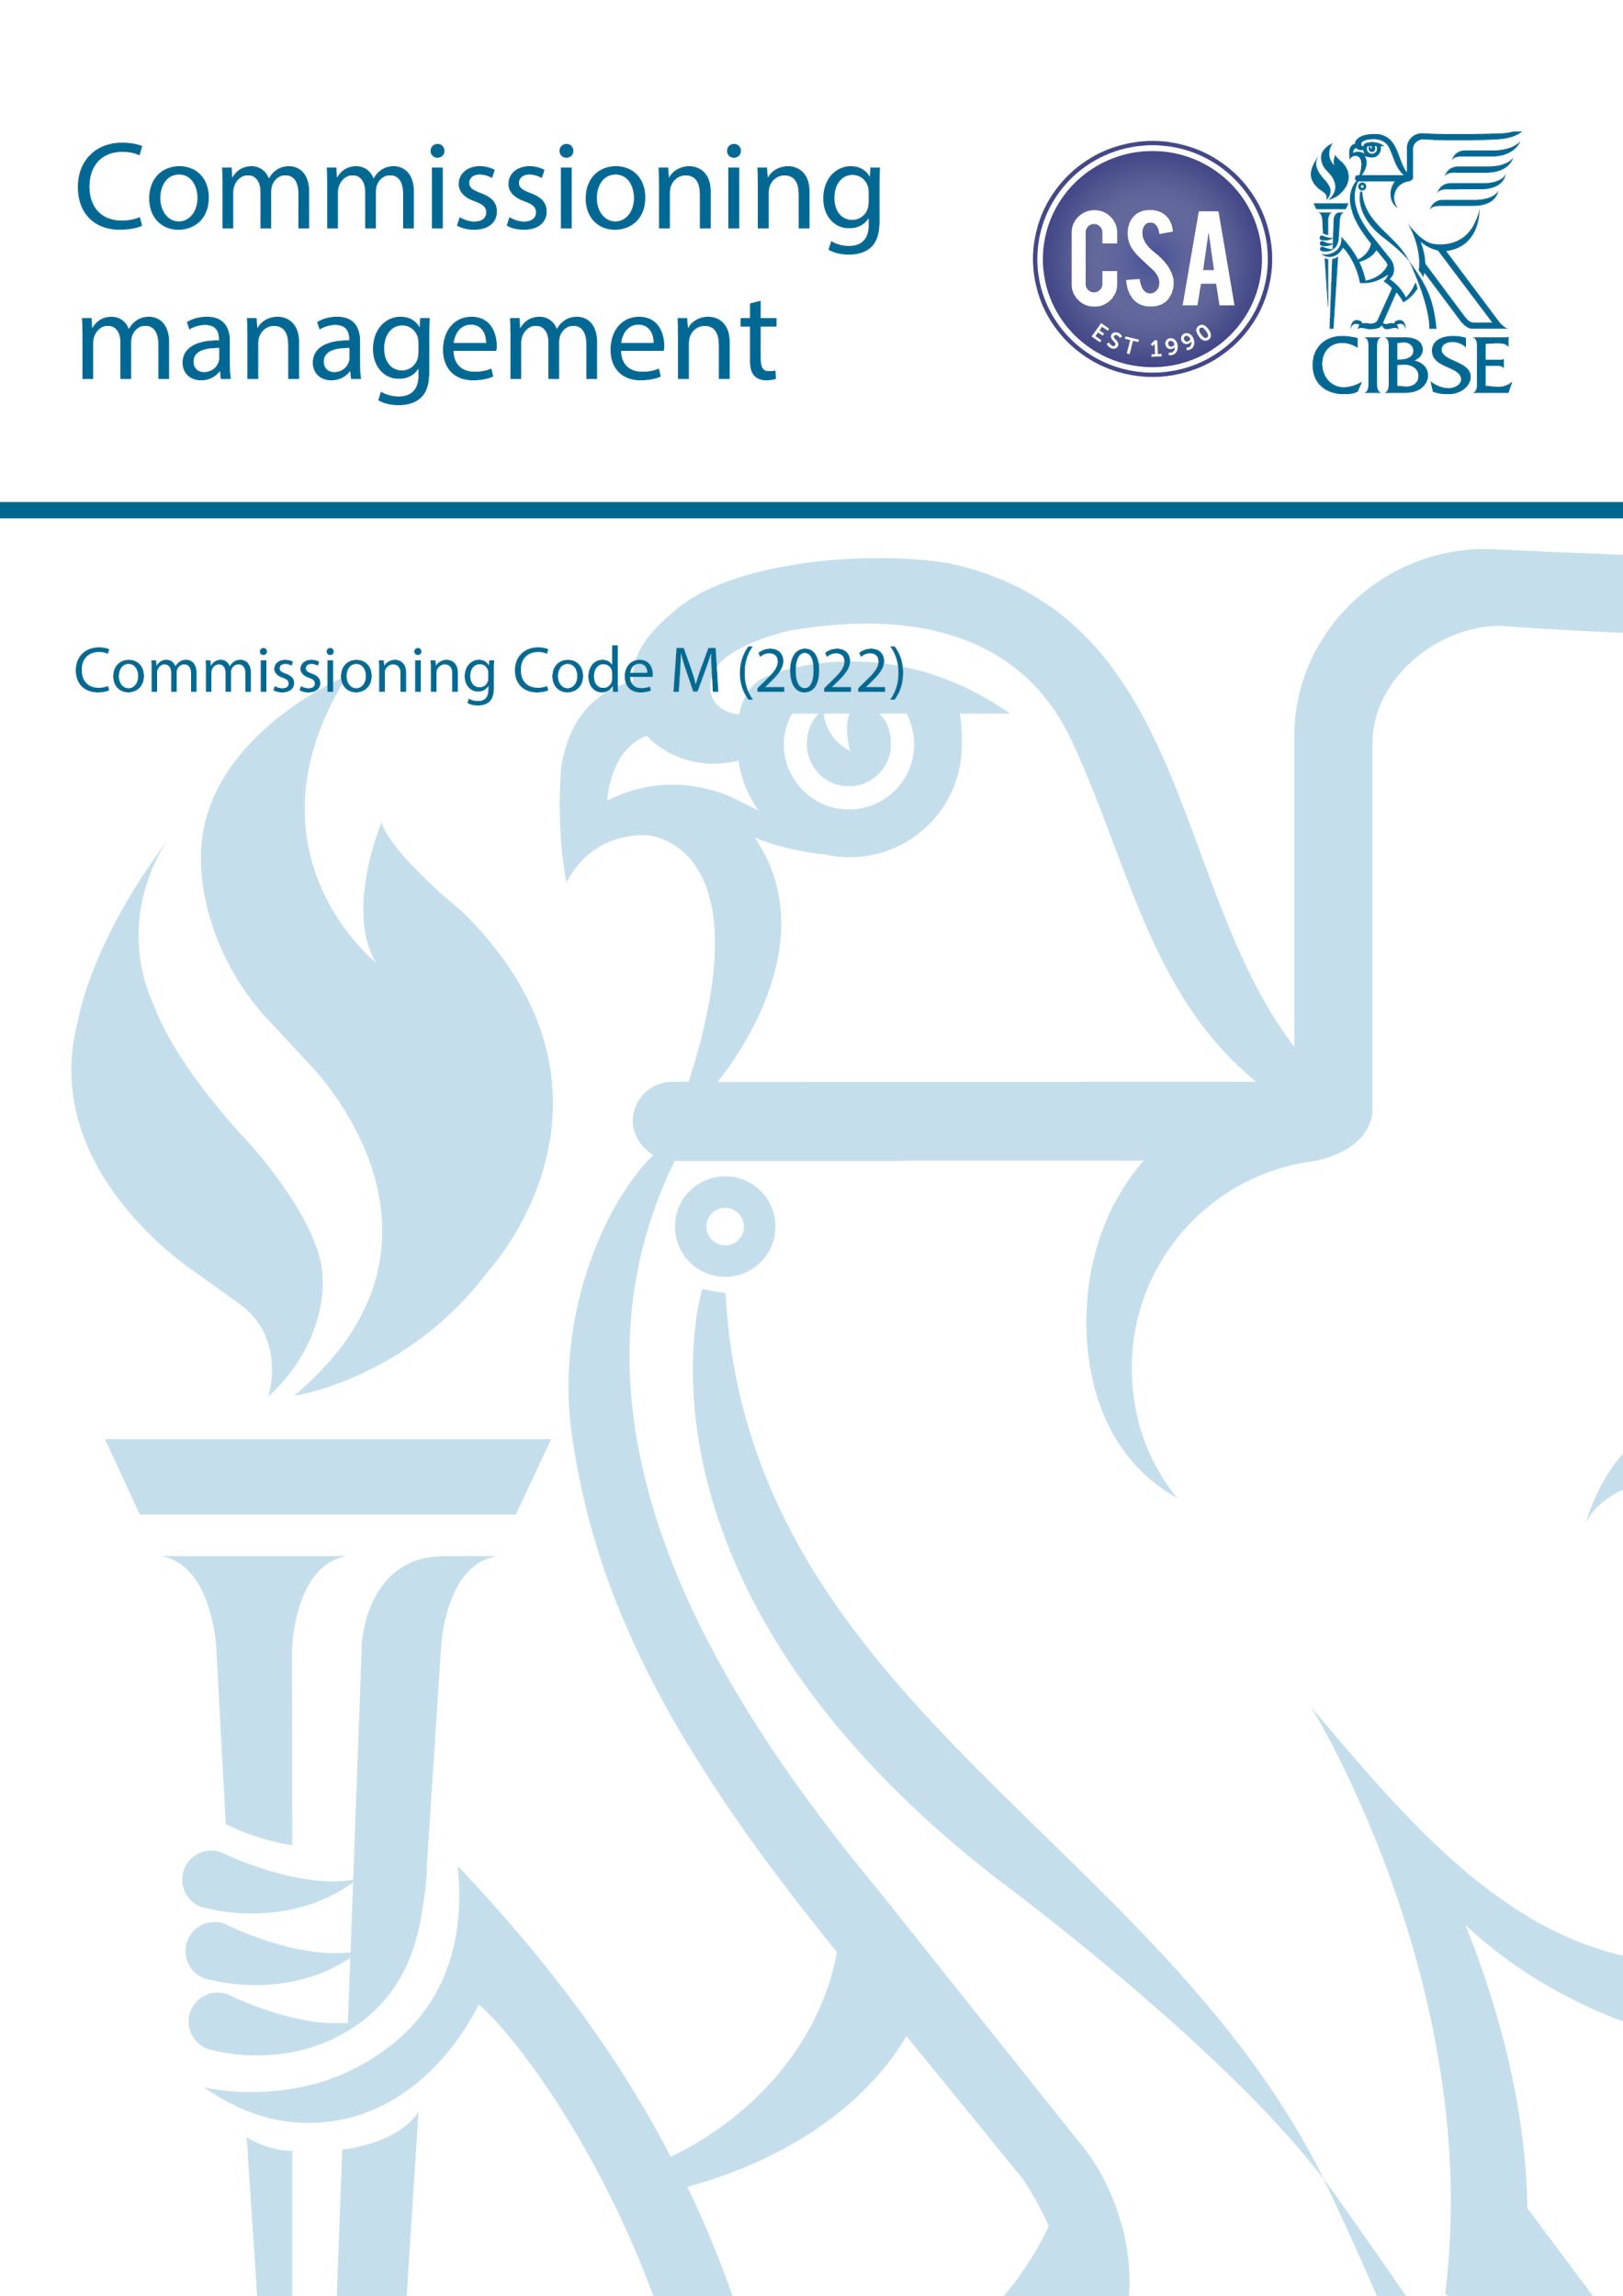 CIBSE Commissioning Code supports carbon mitigation, energy reduction and Net Zero